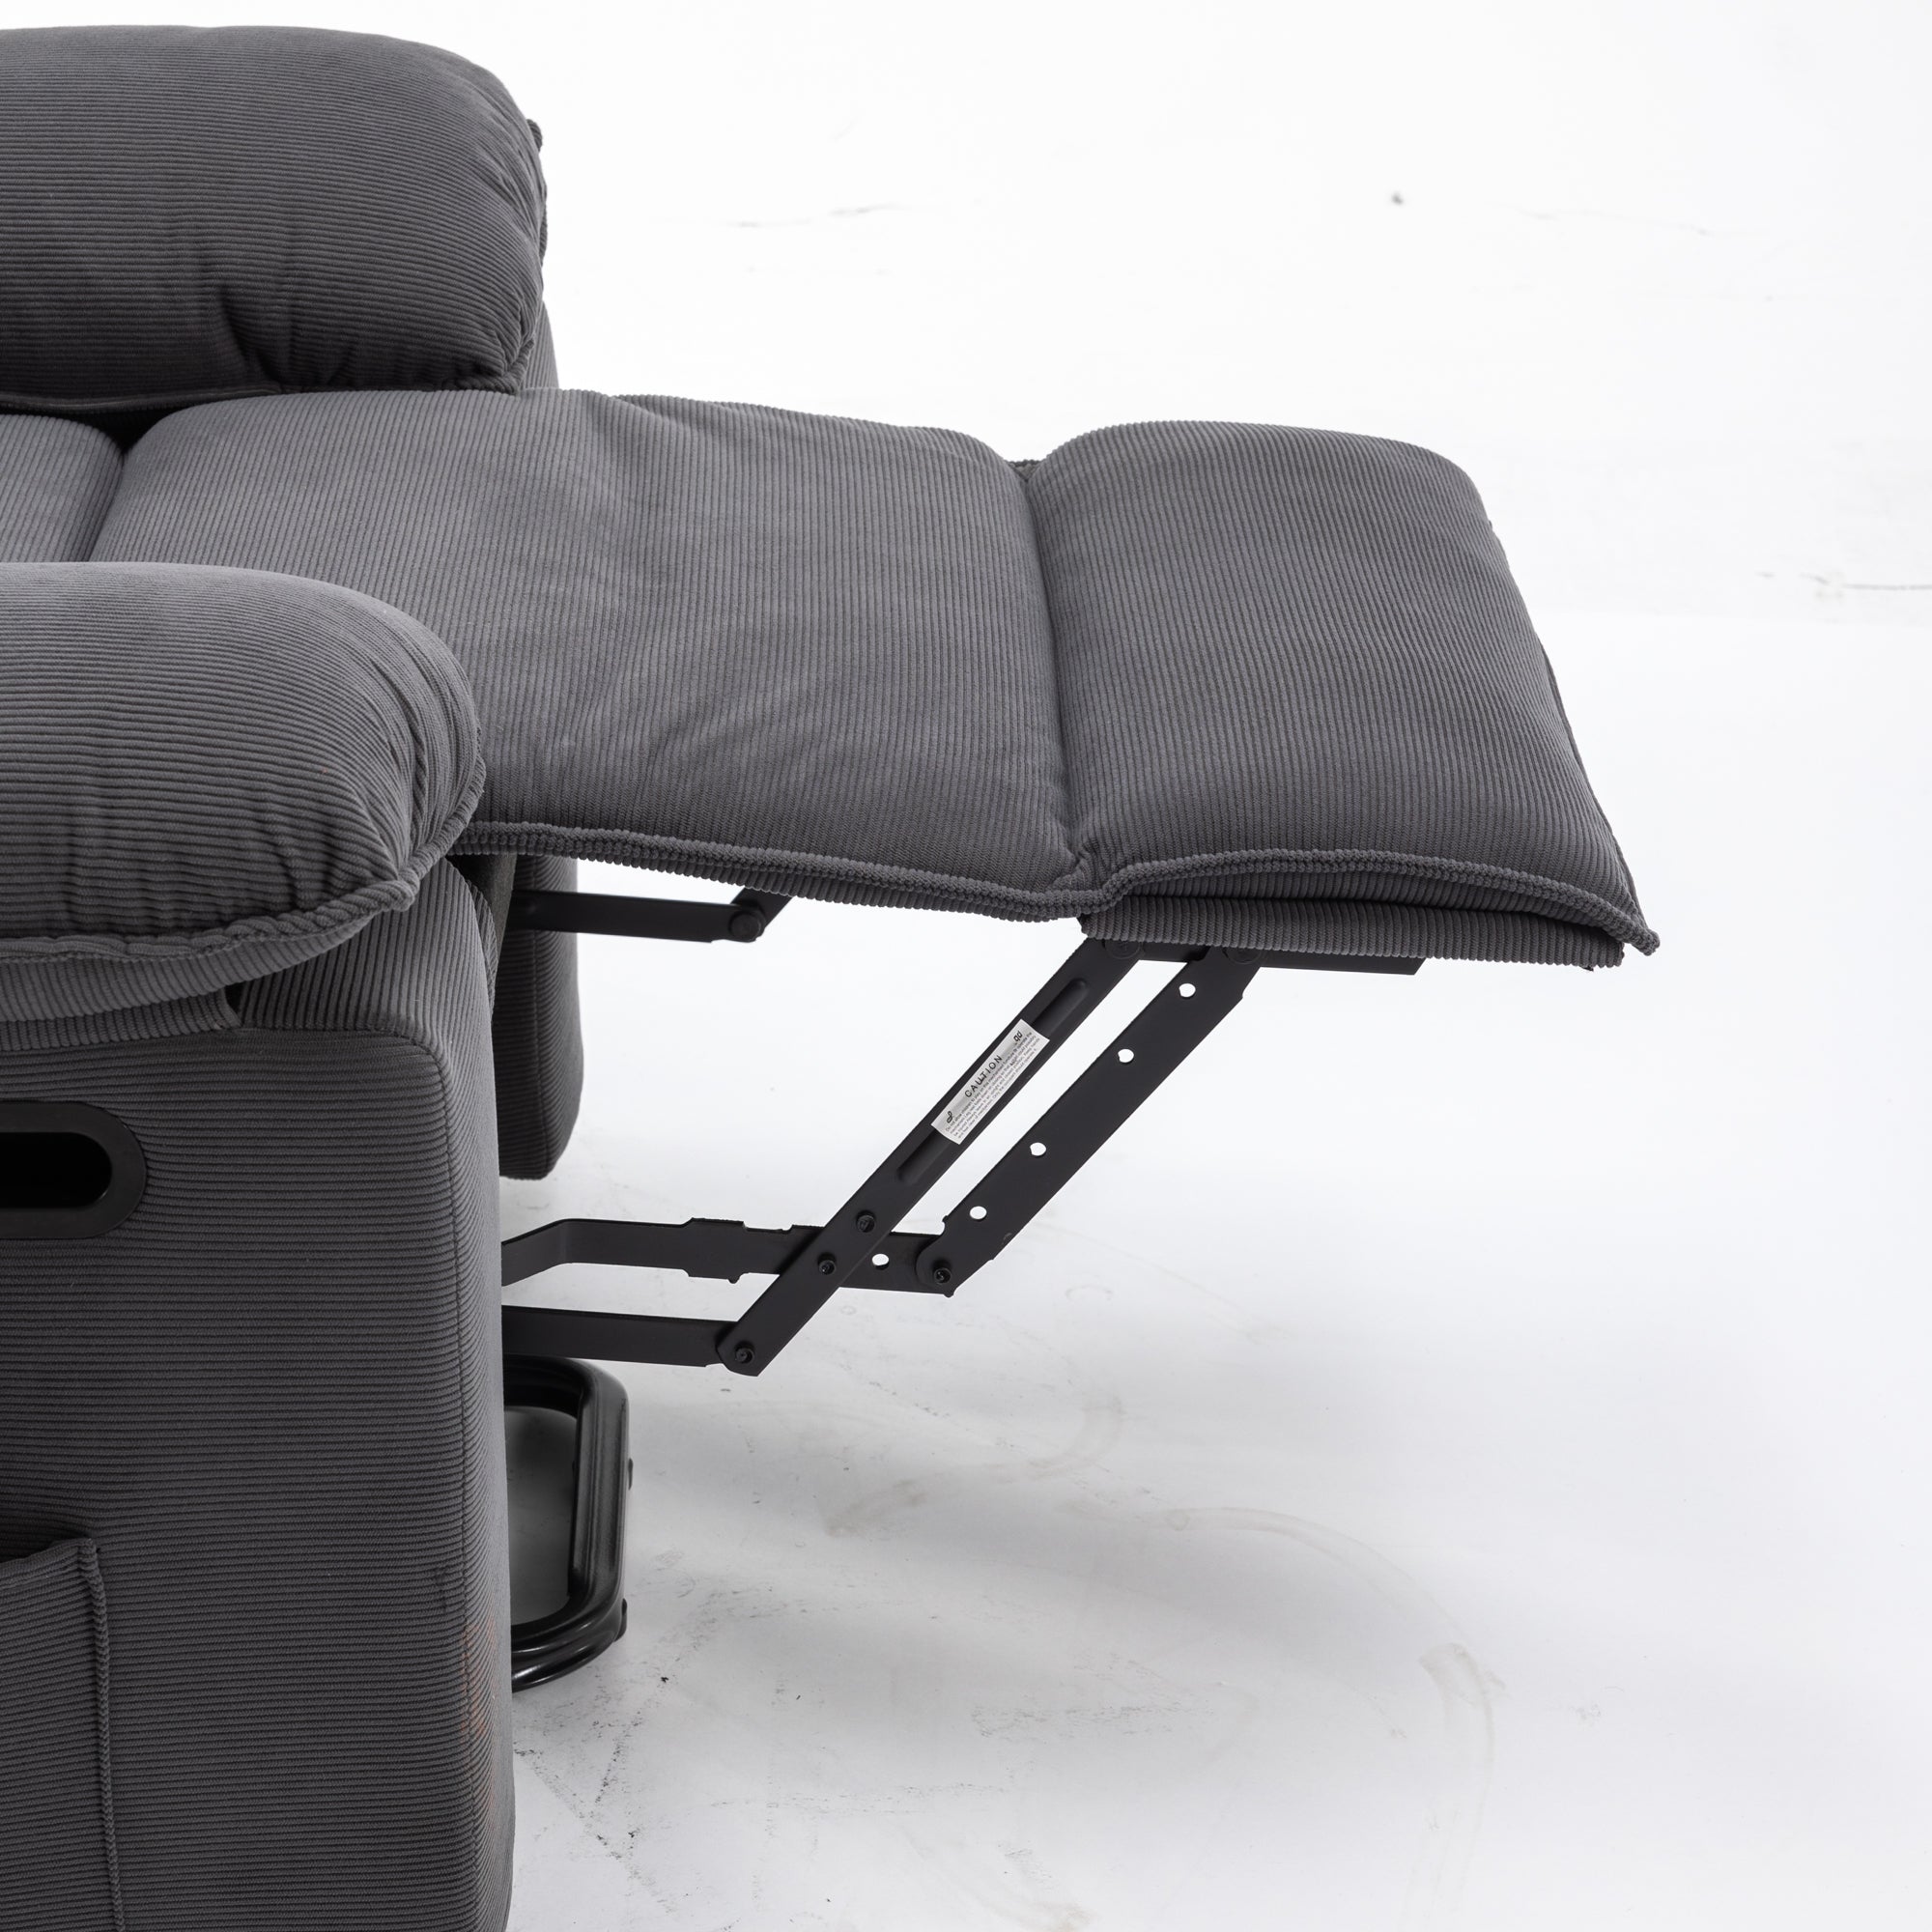 Gray Power Lift Chair with foot extension raised